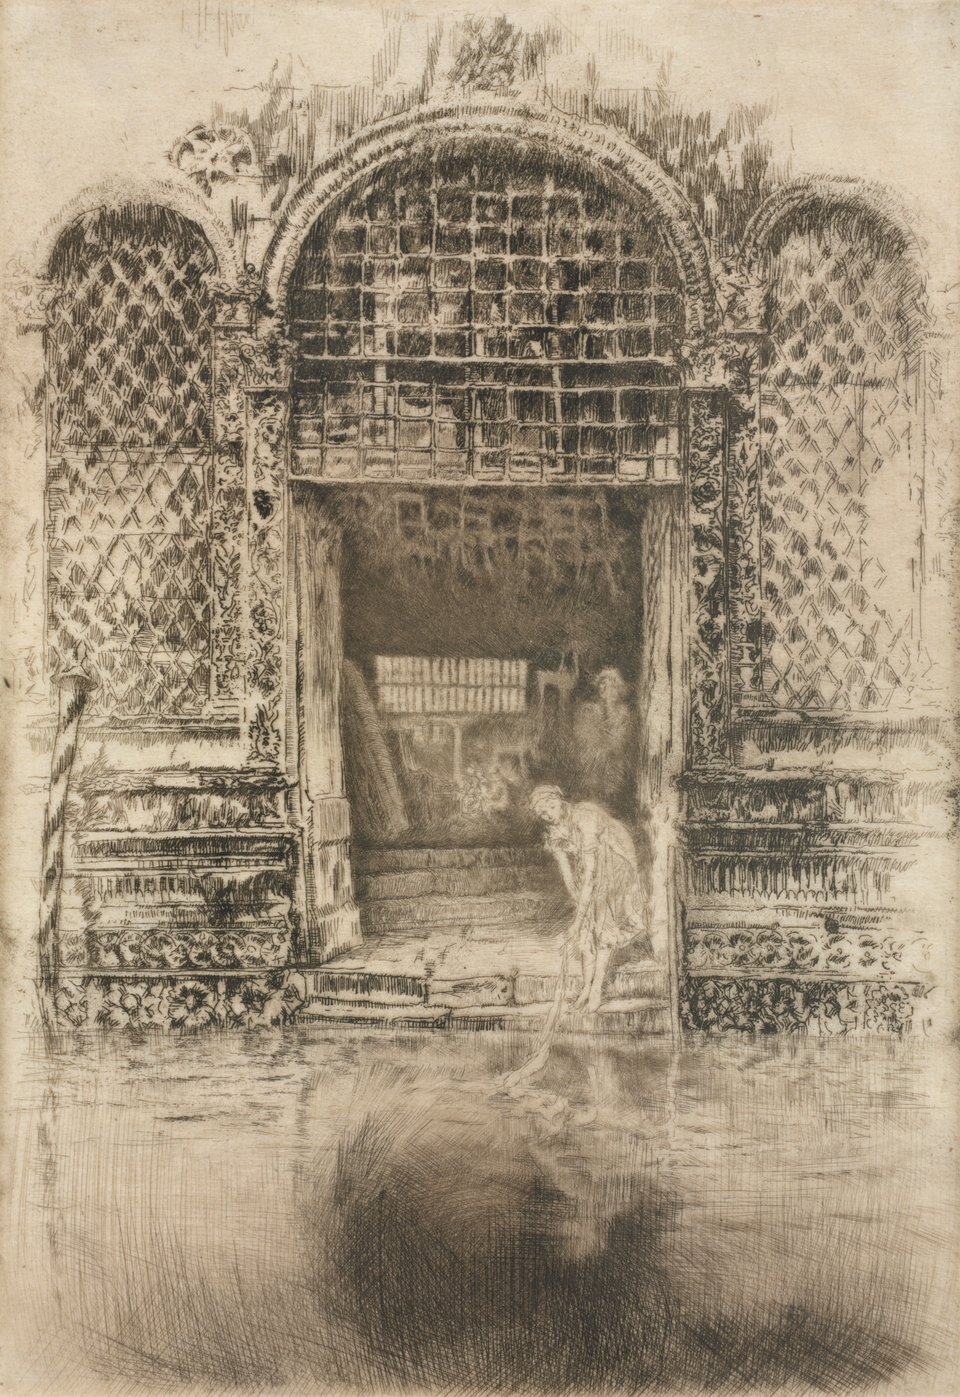 An etching of a large open door next to a canal. A girl is leaning out of the doorway toward the river.